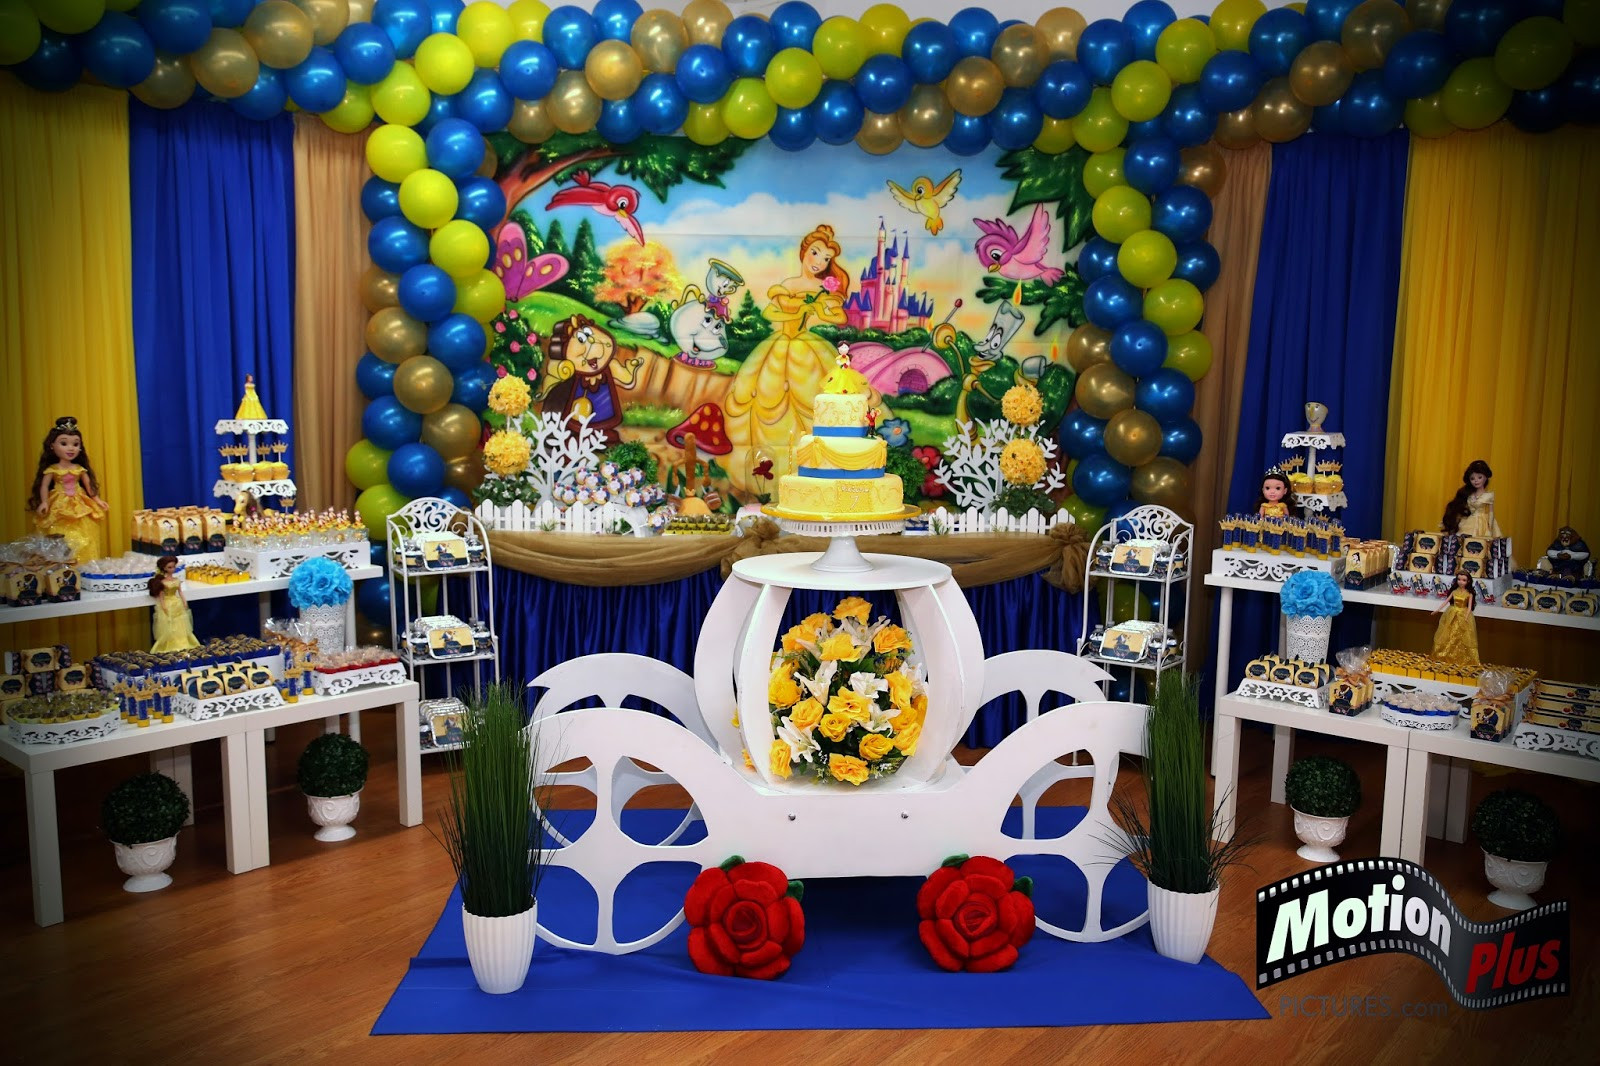 Beauty And The Beast Birthday Party
 Motion Plus "The Beauty and The Beast" Themed